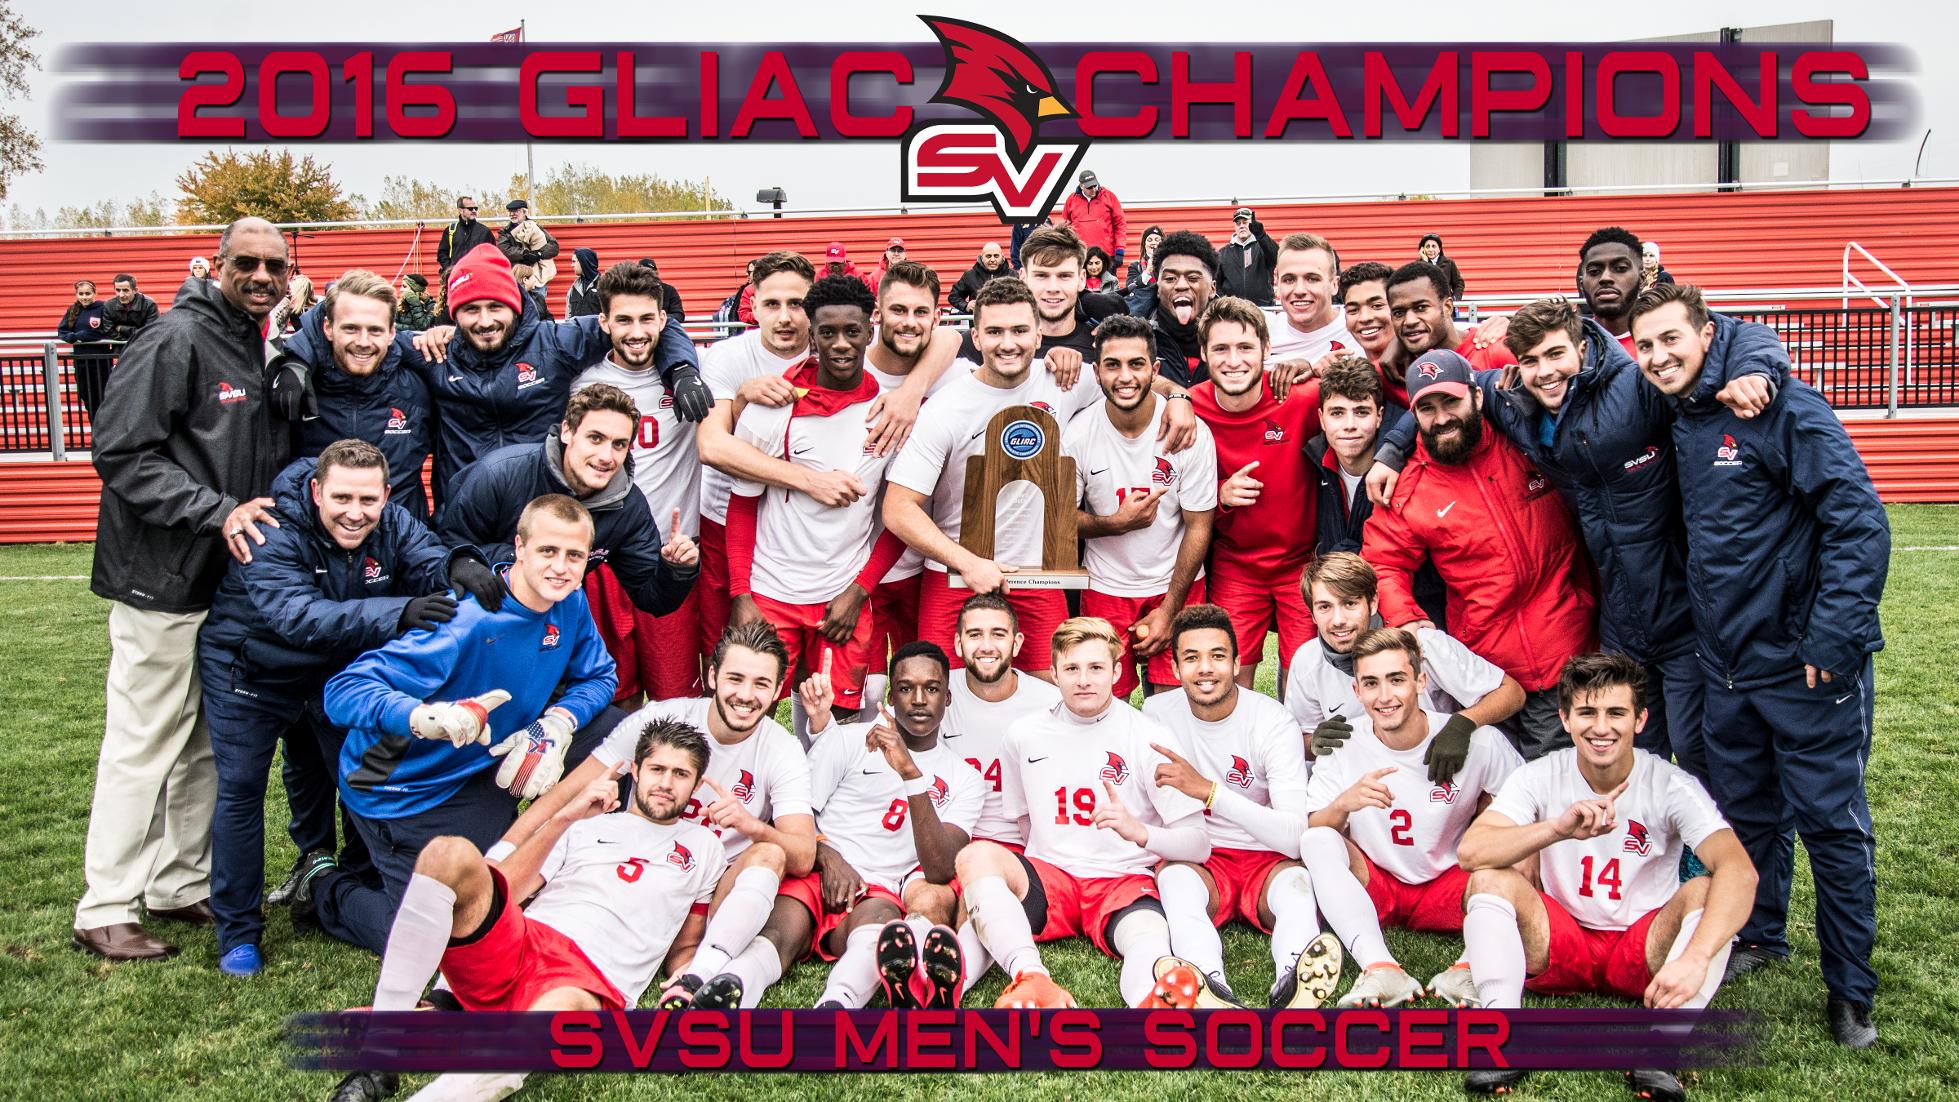 Cardinals Claim GLIAC Championship With 3-1 Victory Over Wildcats